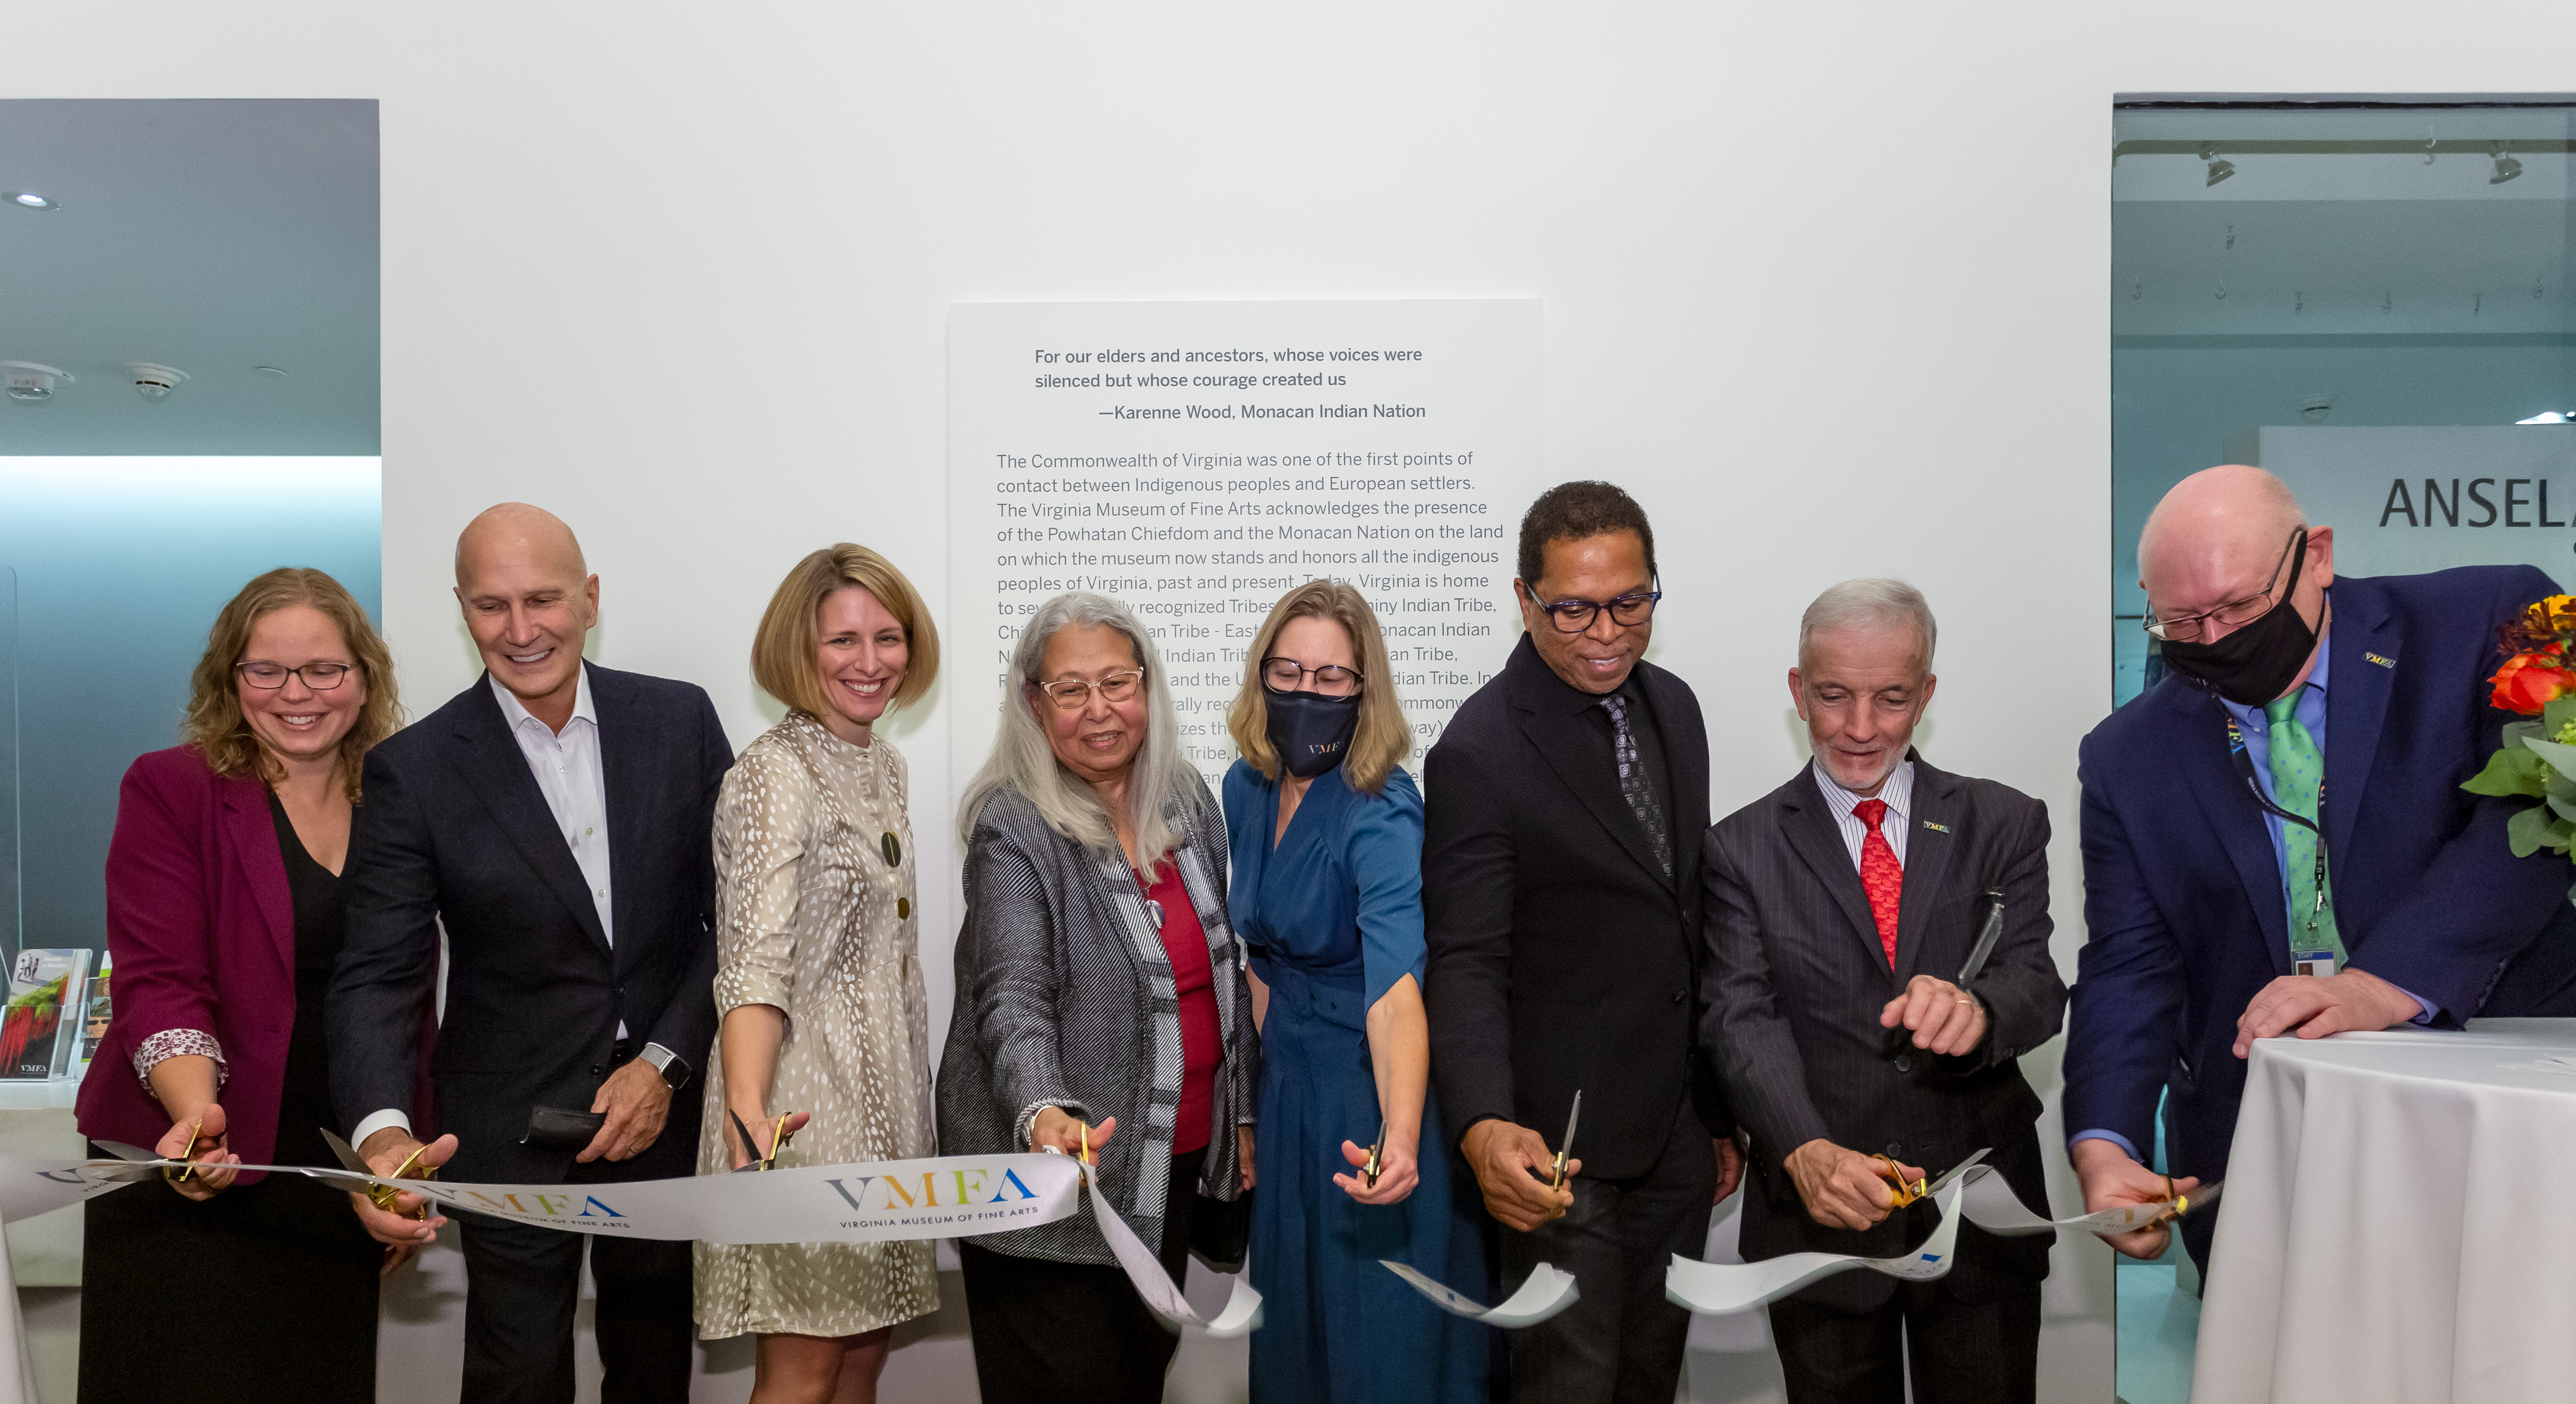 From right to left: Dr. Michael Taylor, VMFA’s Chief Curator and Deputy Director for Art and Education; Alex Nyerges, VMFA’s Director and CEO; Dr. Monroe Harris, President of VMFA’s Board of Trustees; Dr. Johanna Minich, VMFA’s Assistant Curator of Native American Art; Lynette Allston, Nottoway Indian Tribe of Virginia’s Chief and Vice President of VMFA’s Board of Trustees; Katie Payne, VMFA’s Director of Government Relations; Stanley J. Olander, Jr., President and Director of VMFA’s Foundation Board of Directors; and Kelly Thomasson, Secretary of the Commonwealth of Virginia. Photo by Sandra Sellars, © 2021 Virginia Museum of Fine Arts